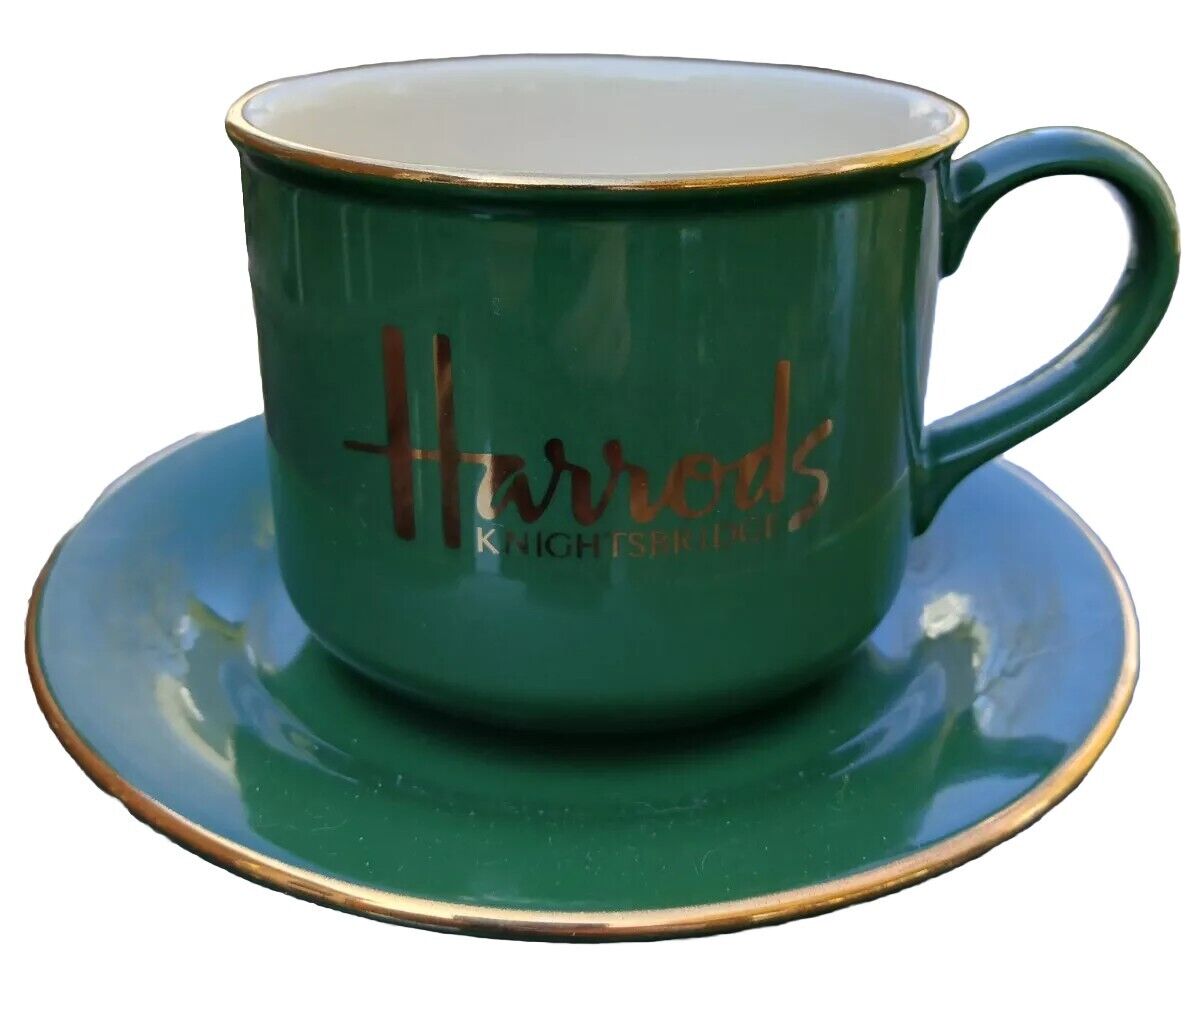 VTG Harrods Knightsbridge Tea Cup and Saucer Set GREEN Made In England Gold NWT